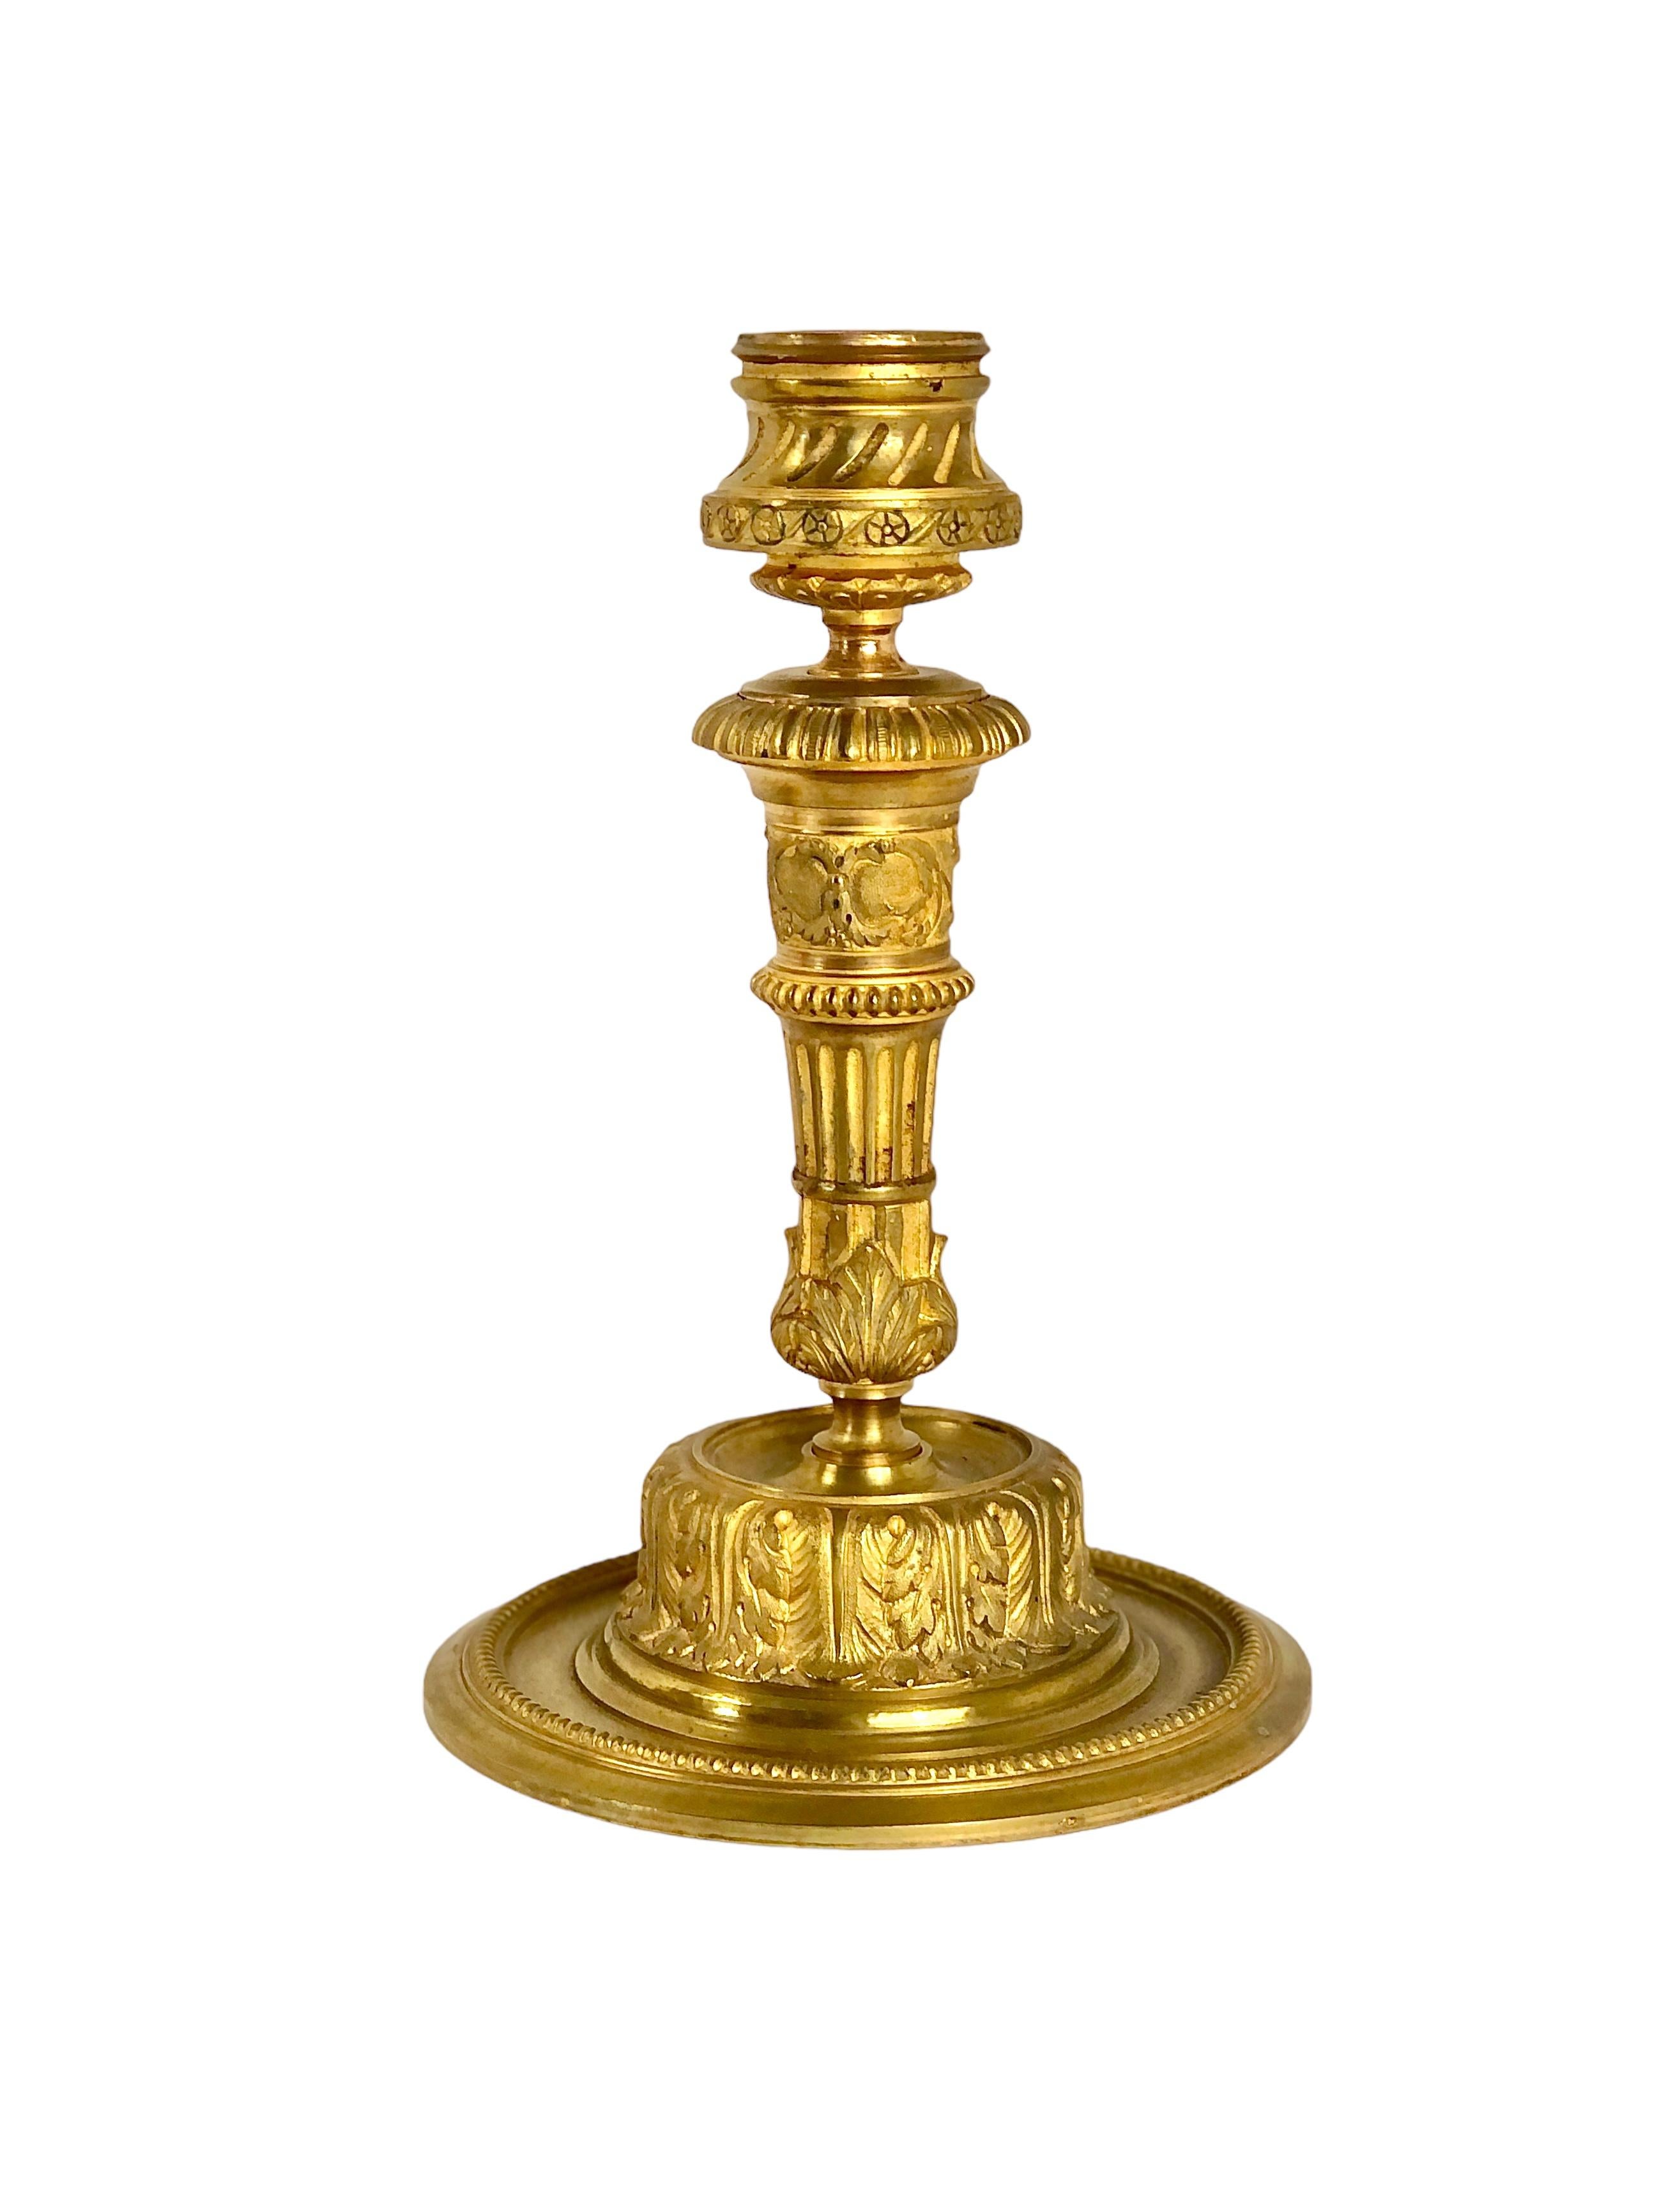 French Pair of Ornate Gilt Bronze Candlesticks, 19th Century